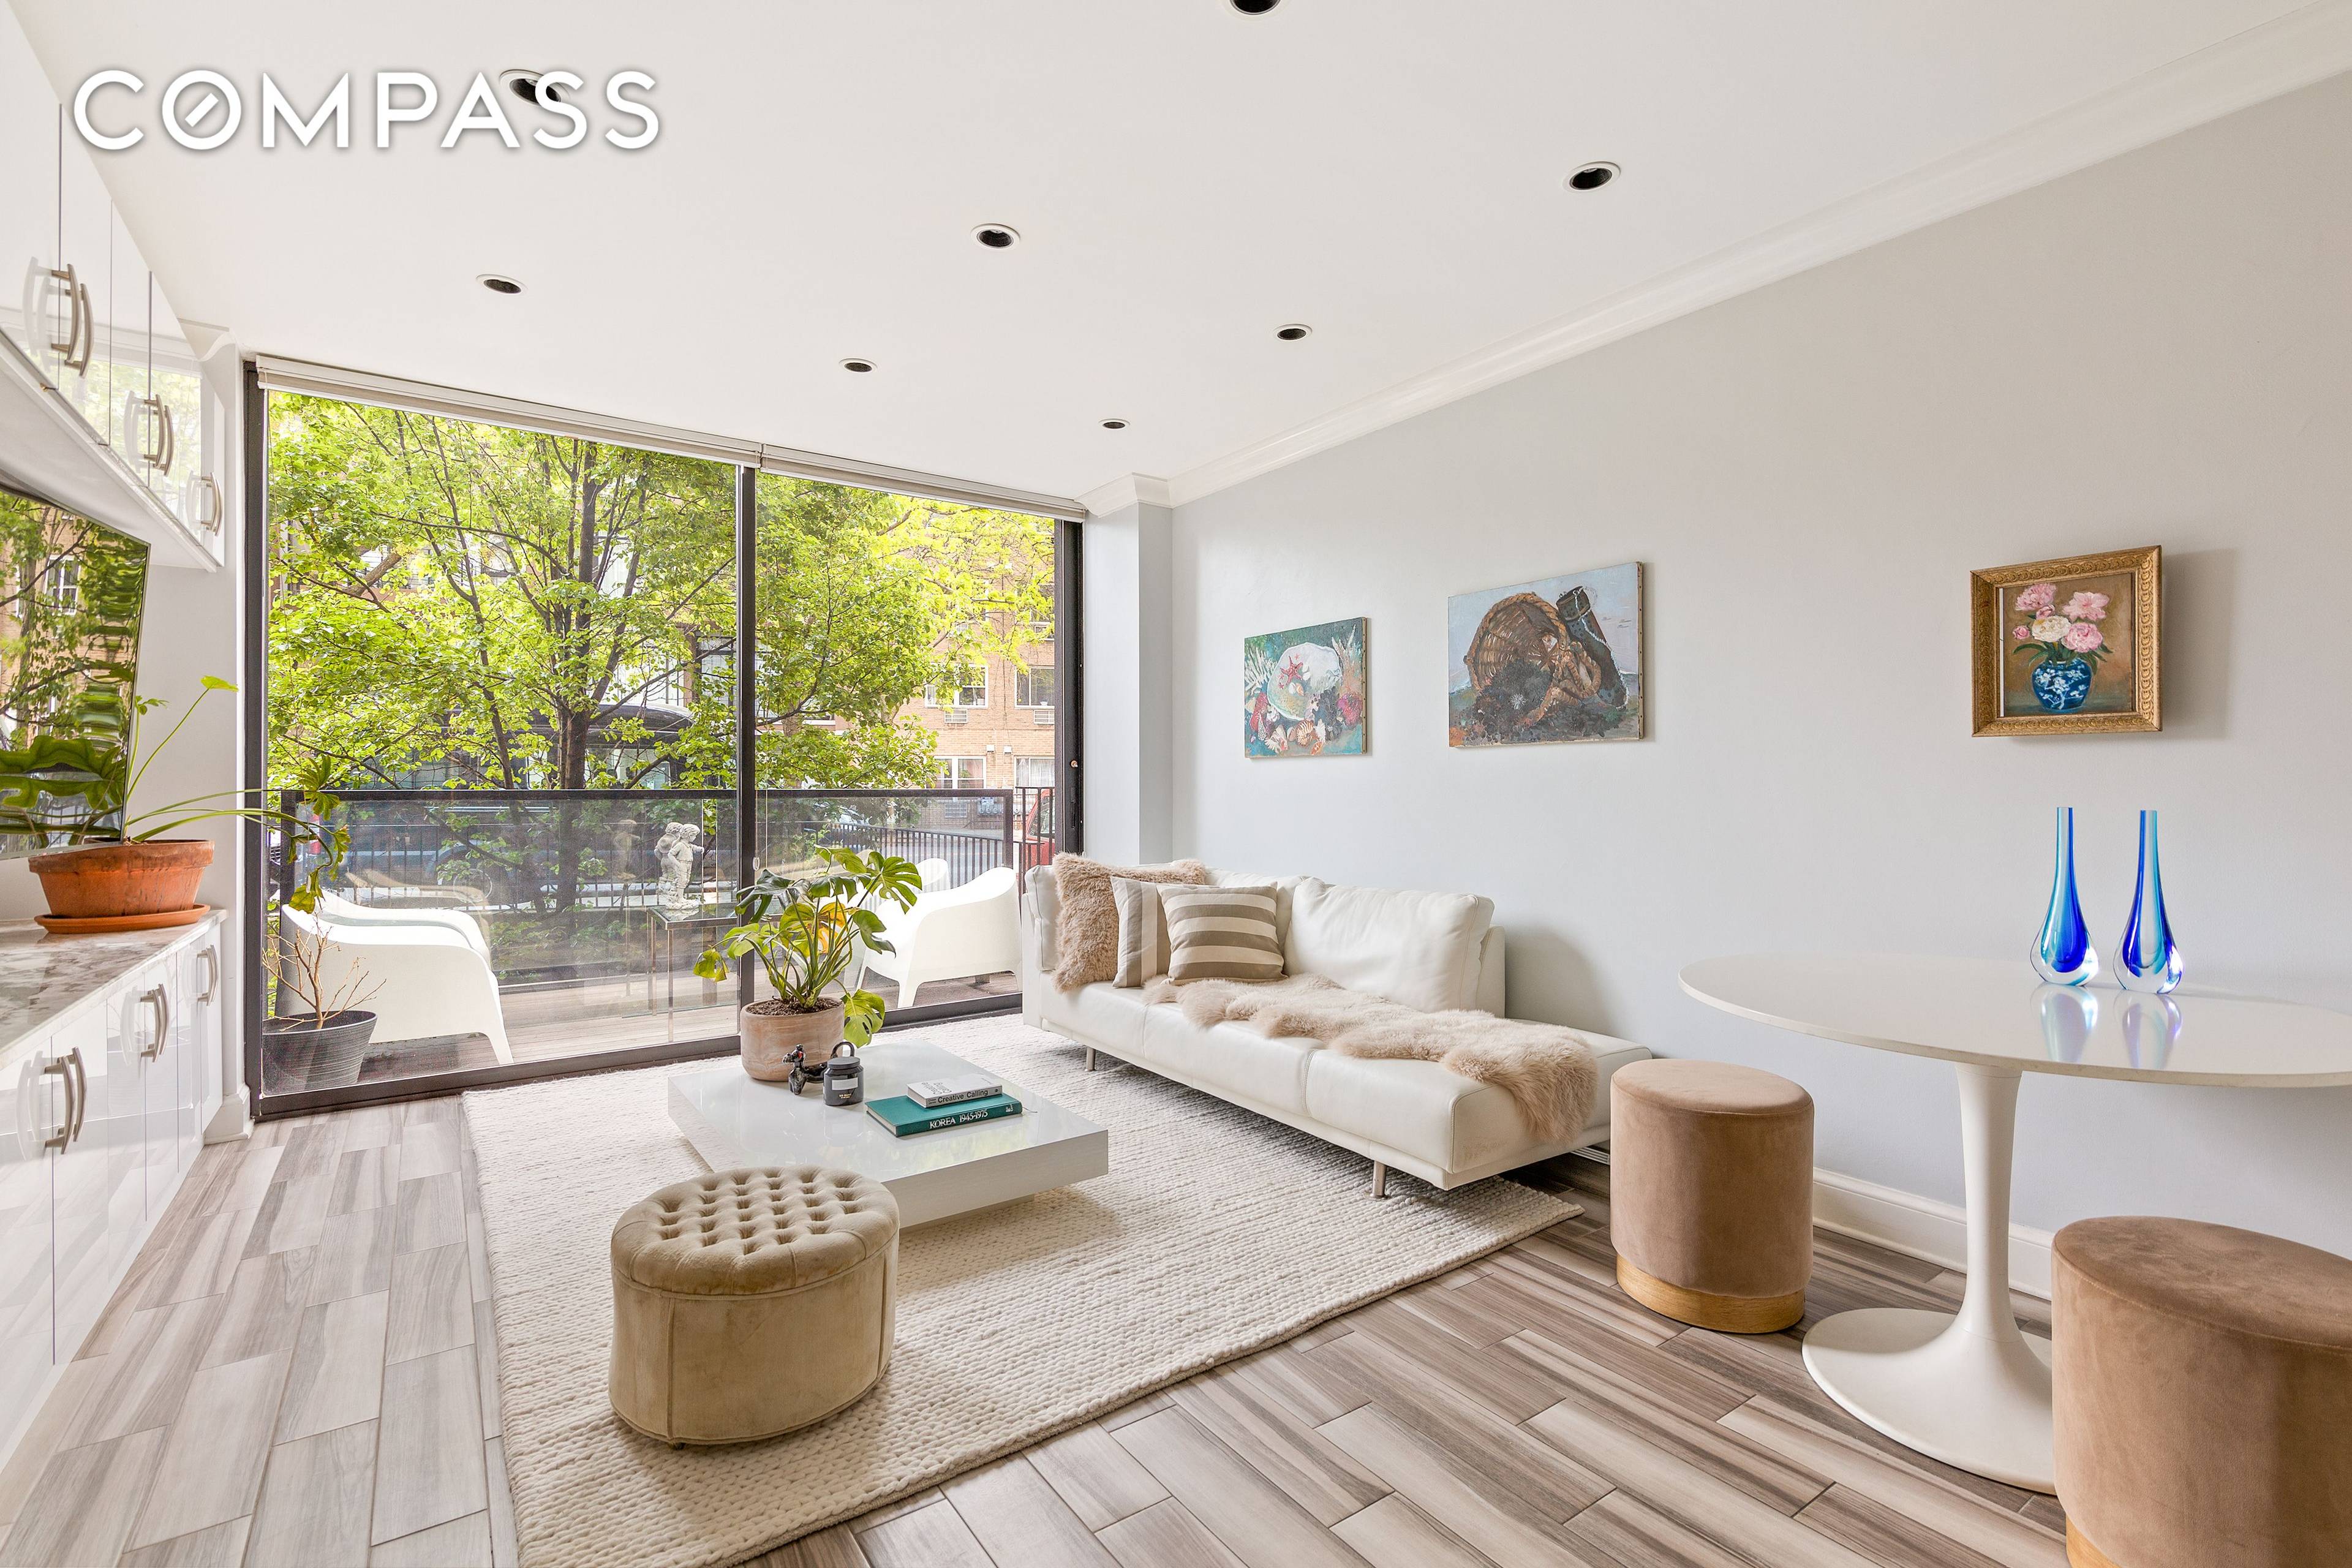 This recently renovated apartment is located in a stylish Williamsburg condominium building.